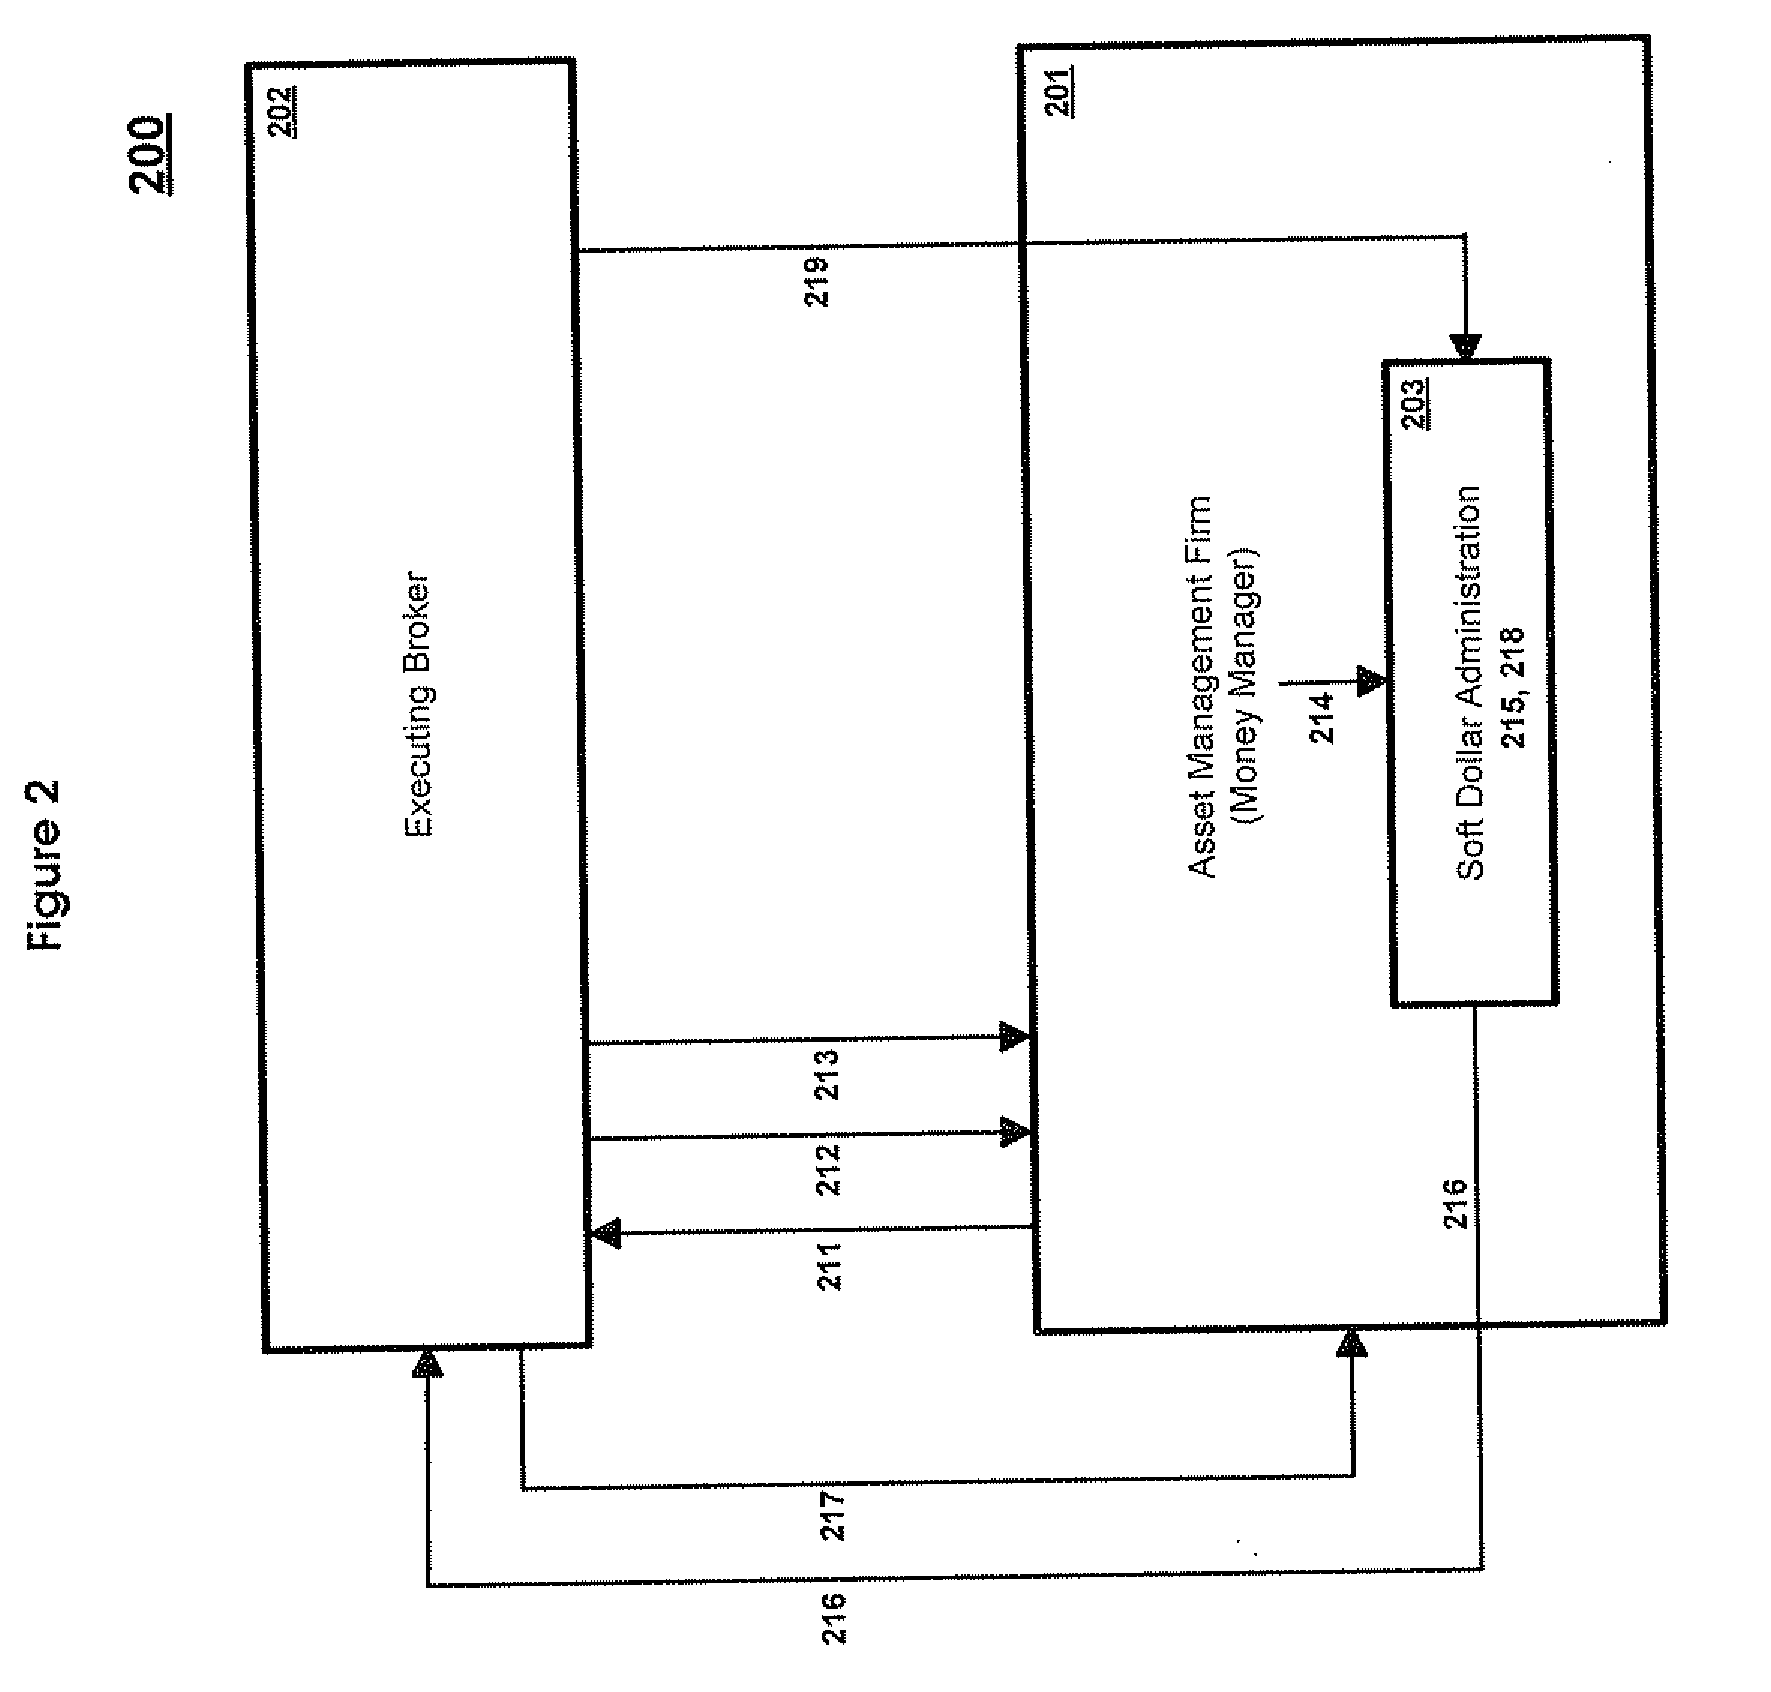 System and method for assigning responsibility for trade order execution